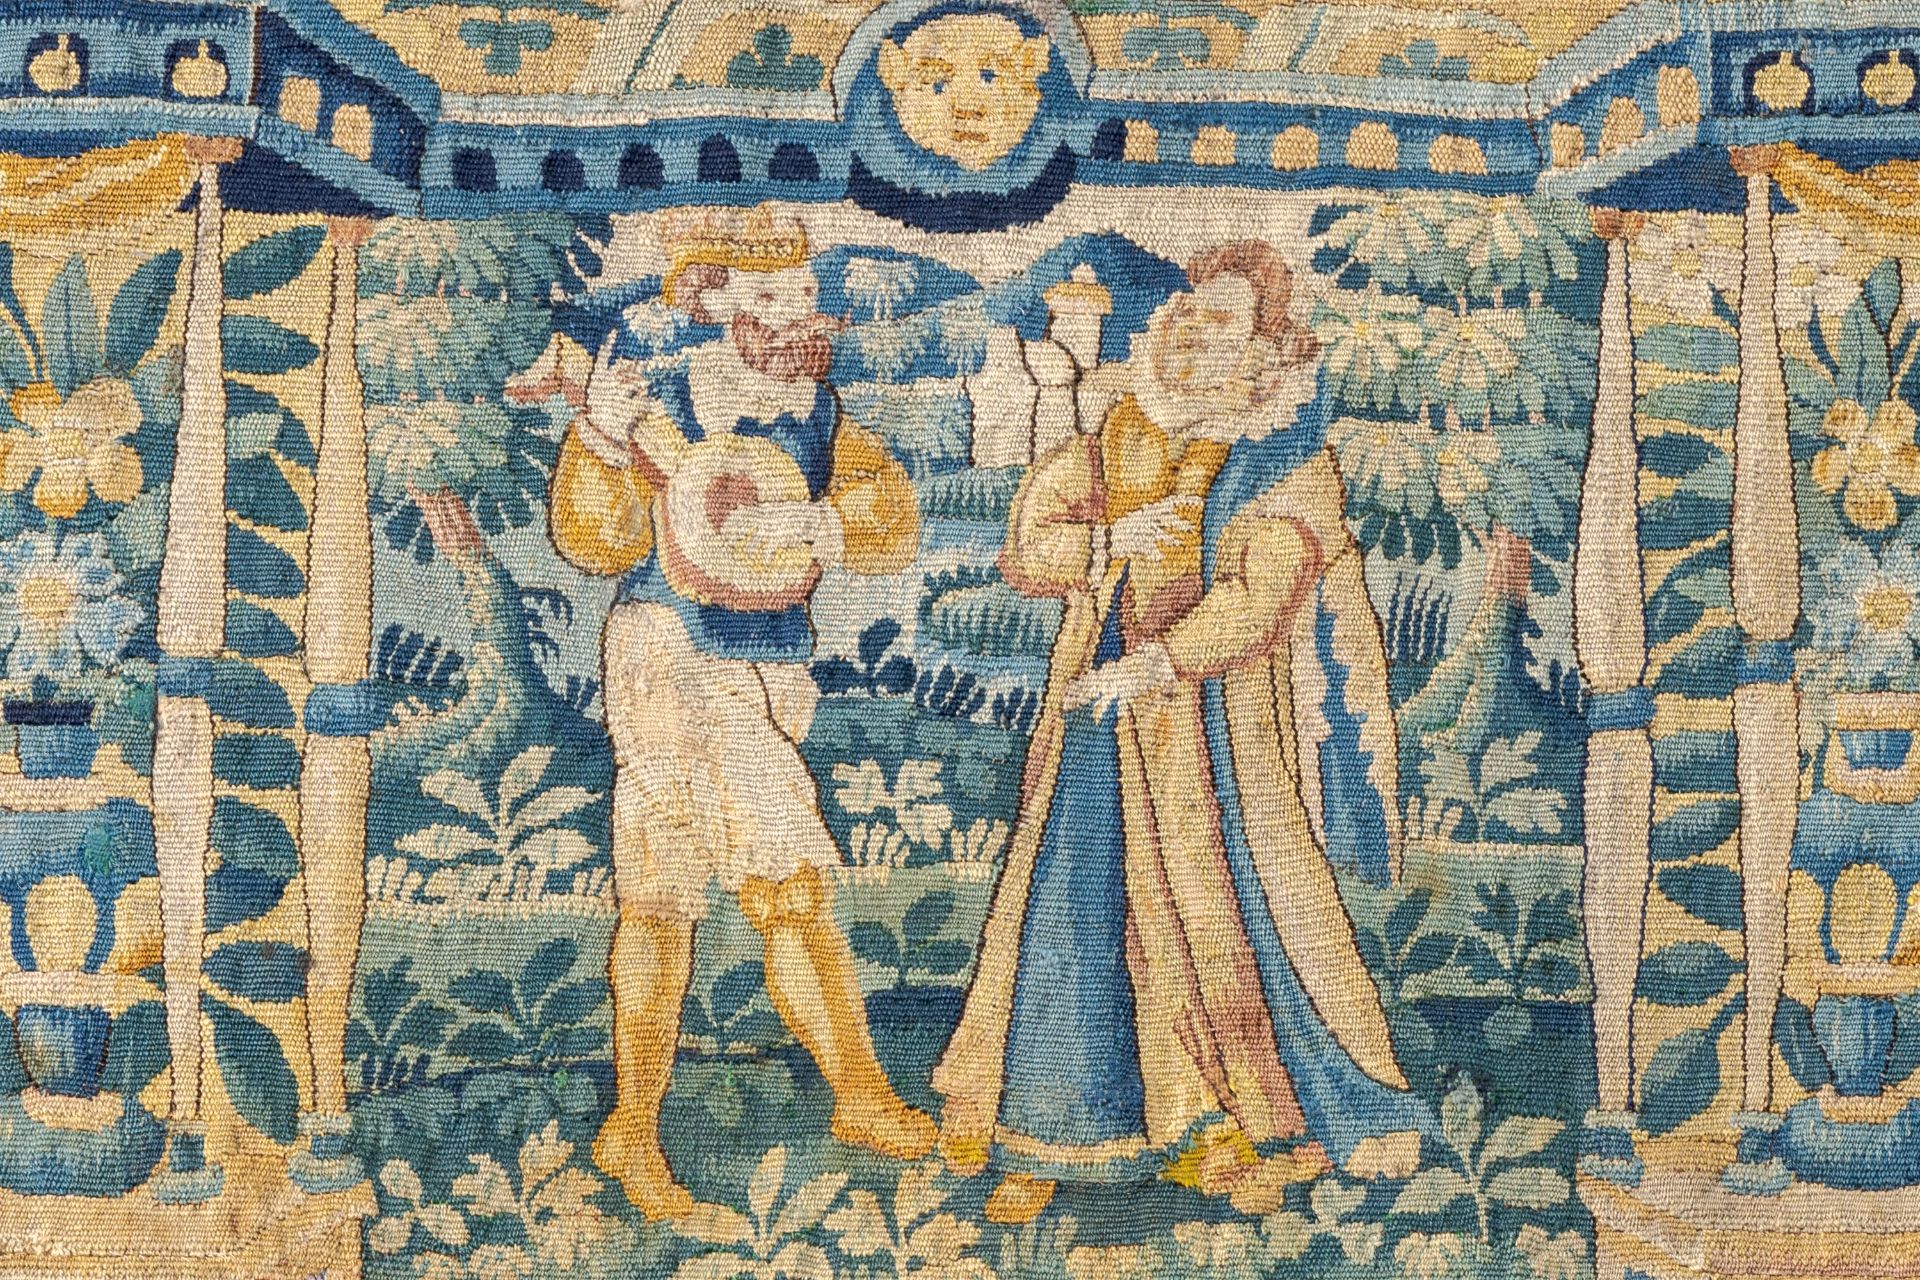 Two fragments of Flemish wall tapestries with musicians, 17th C. - Image 7 of 10